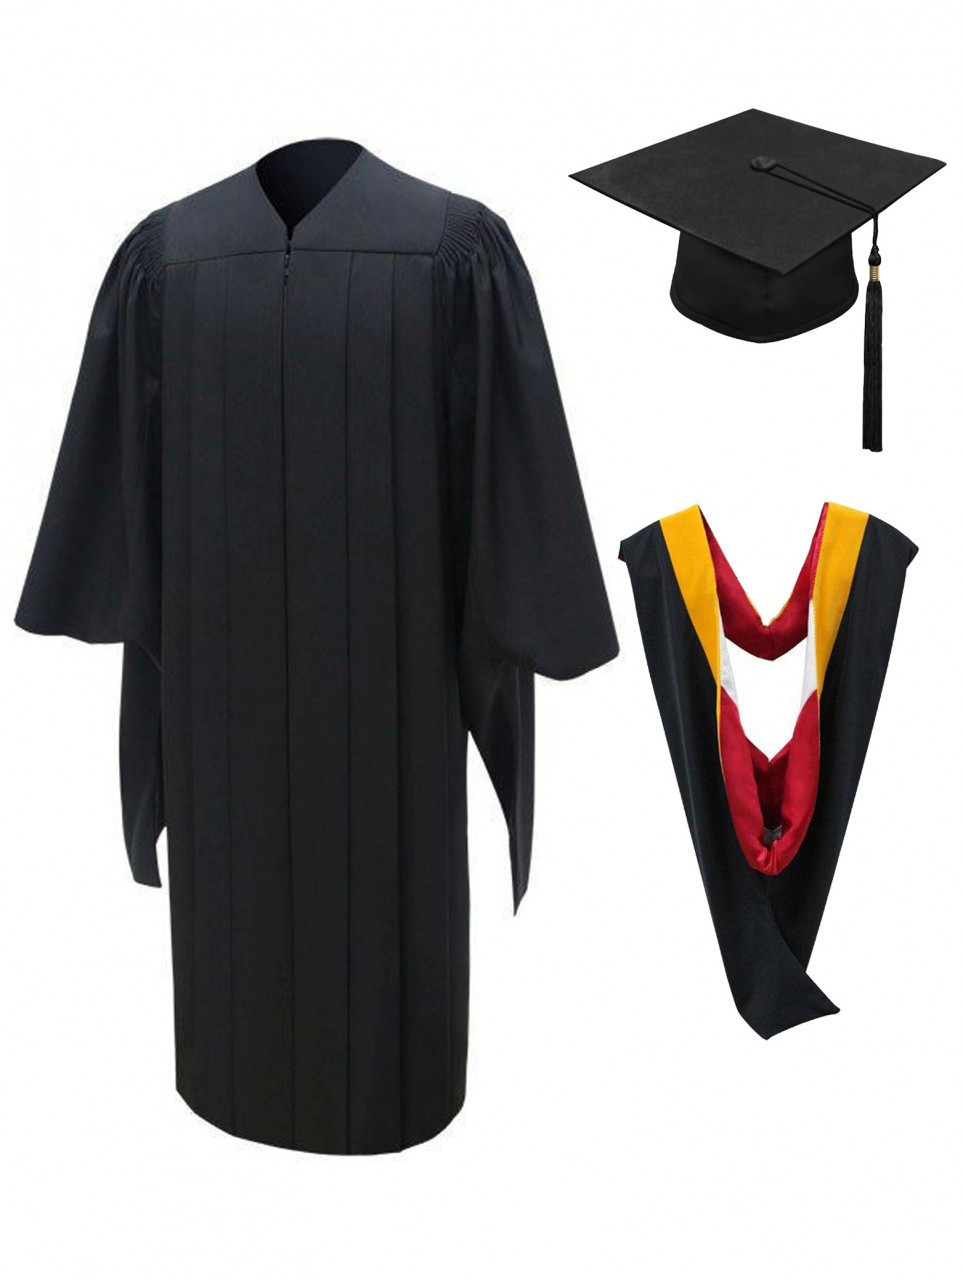 Deluxe fluted Bachelor Graduation Gown Cap Tassel Package - Black